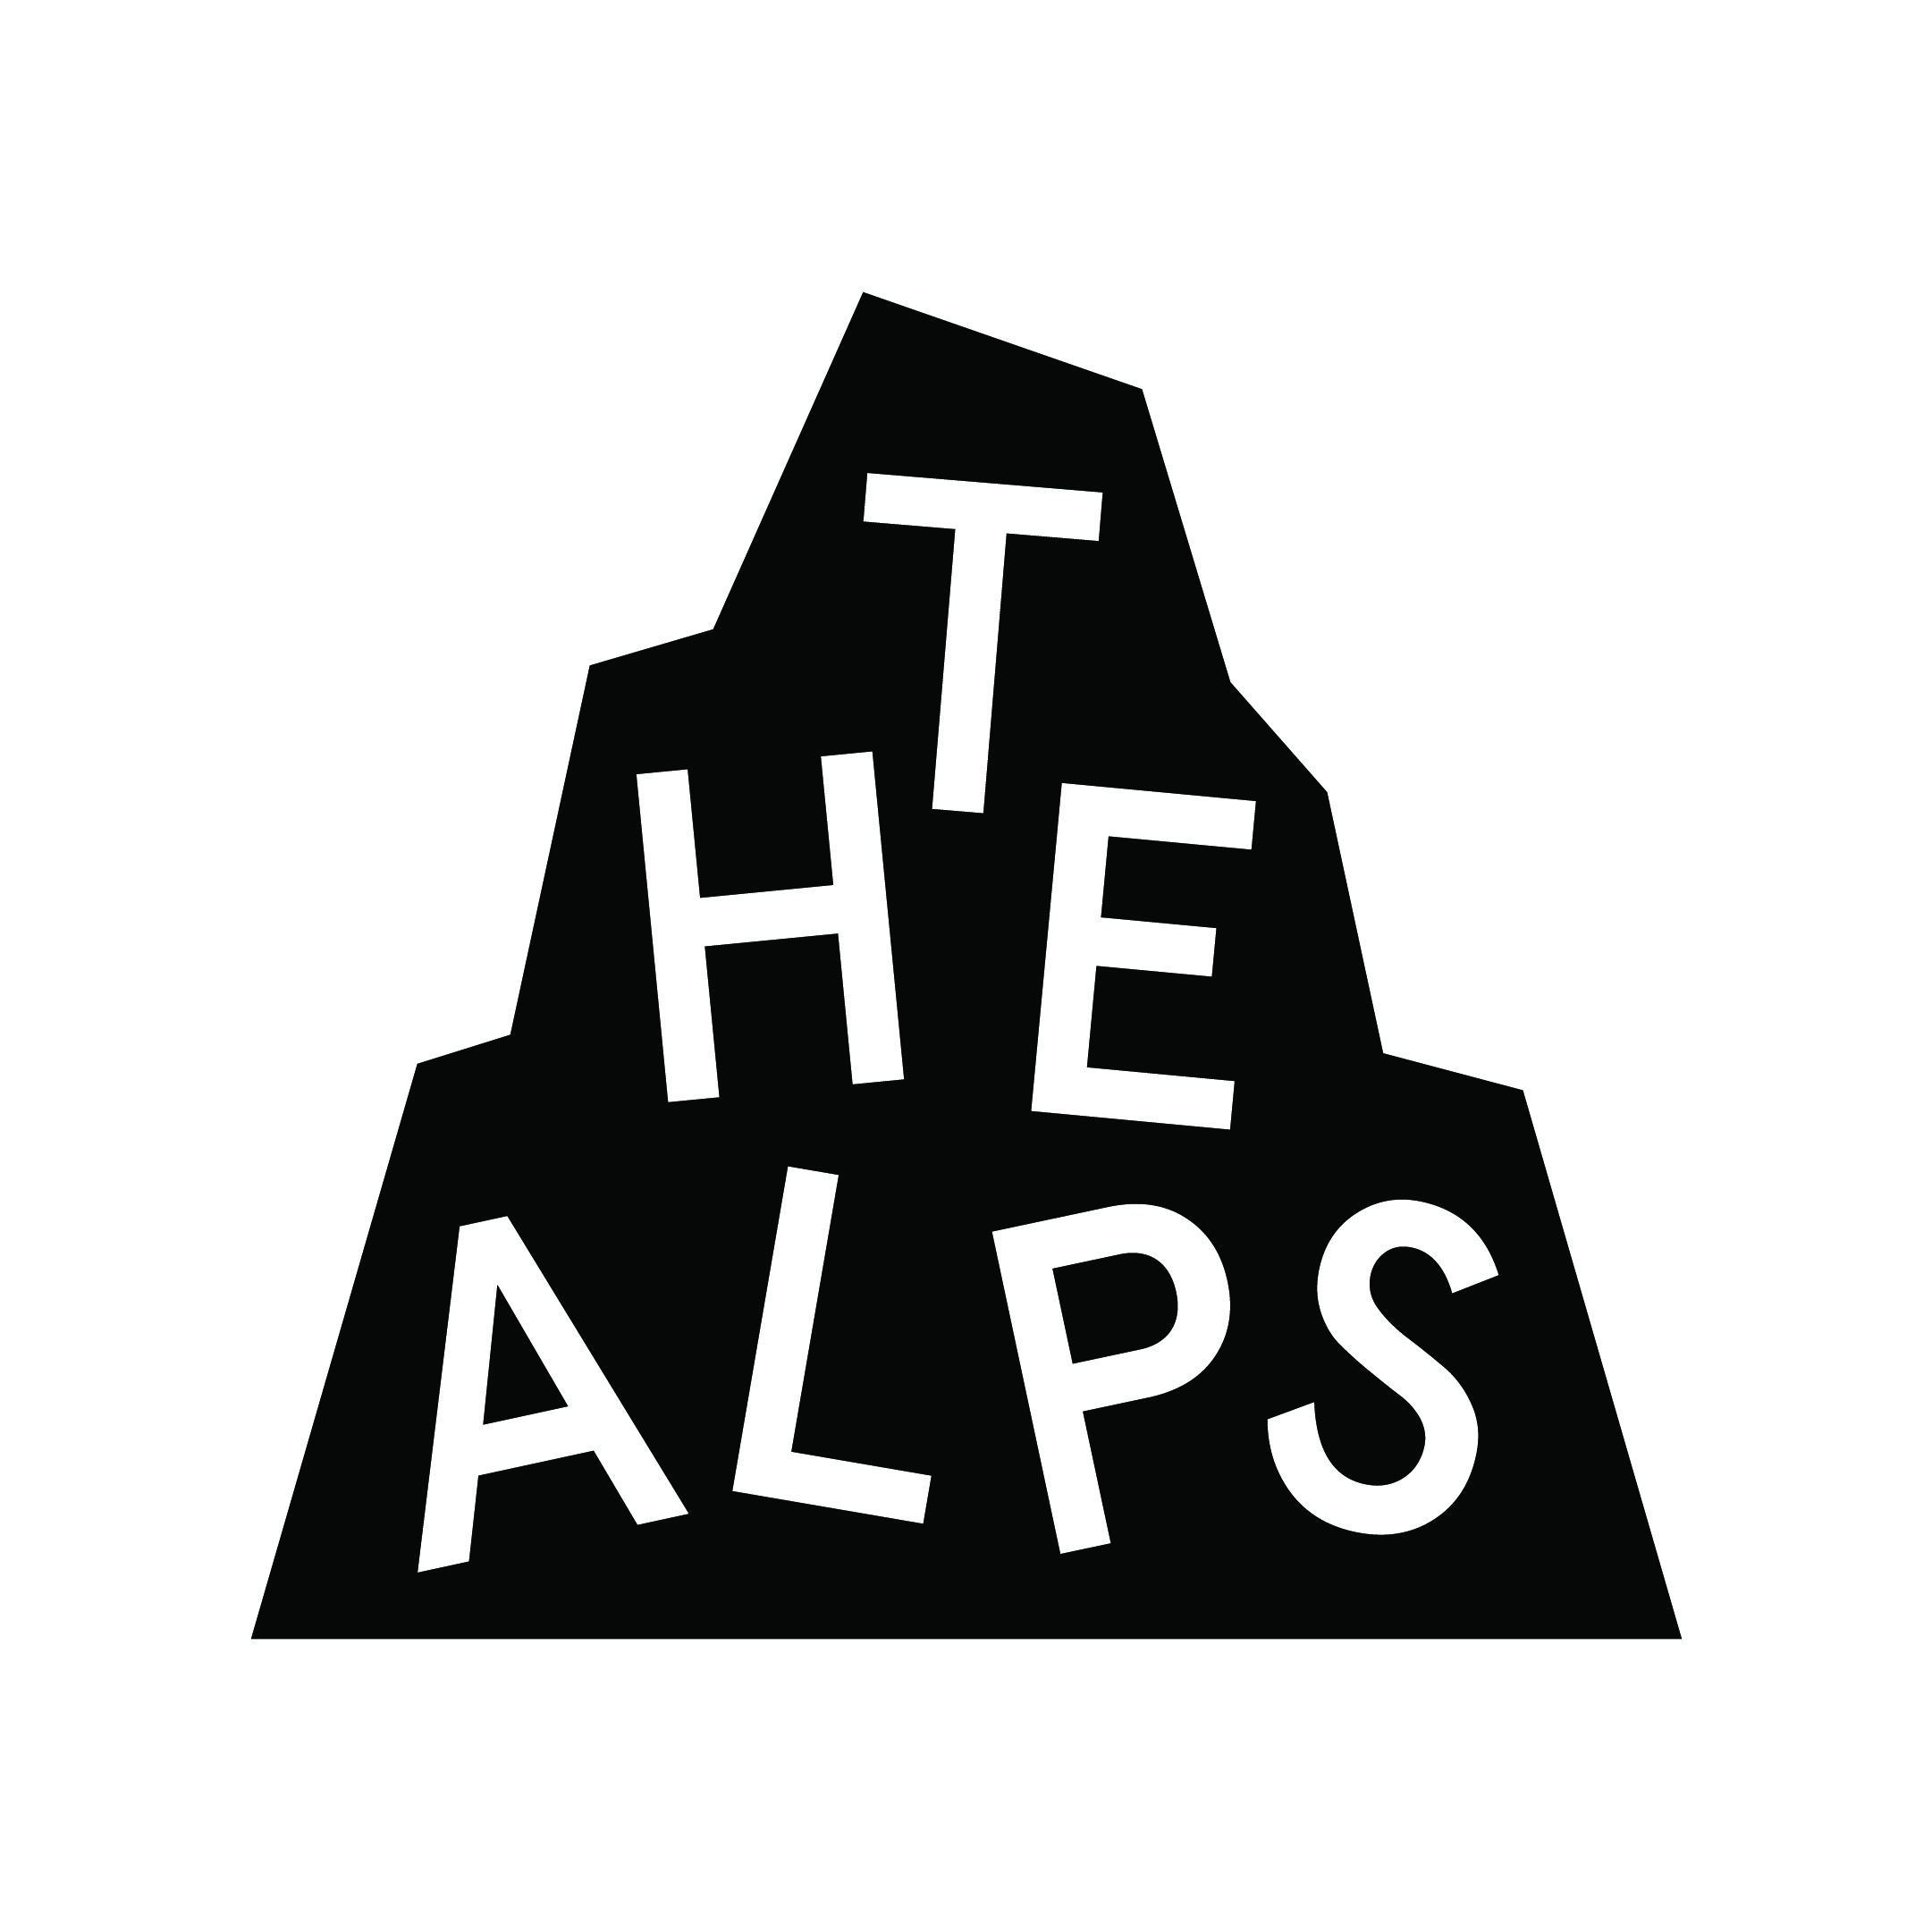 The Alps wine bar and bottle shop